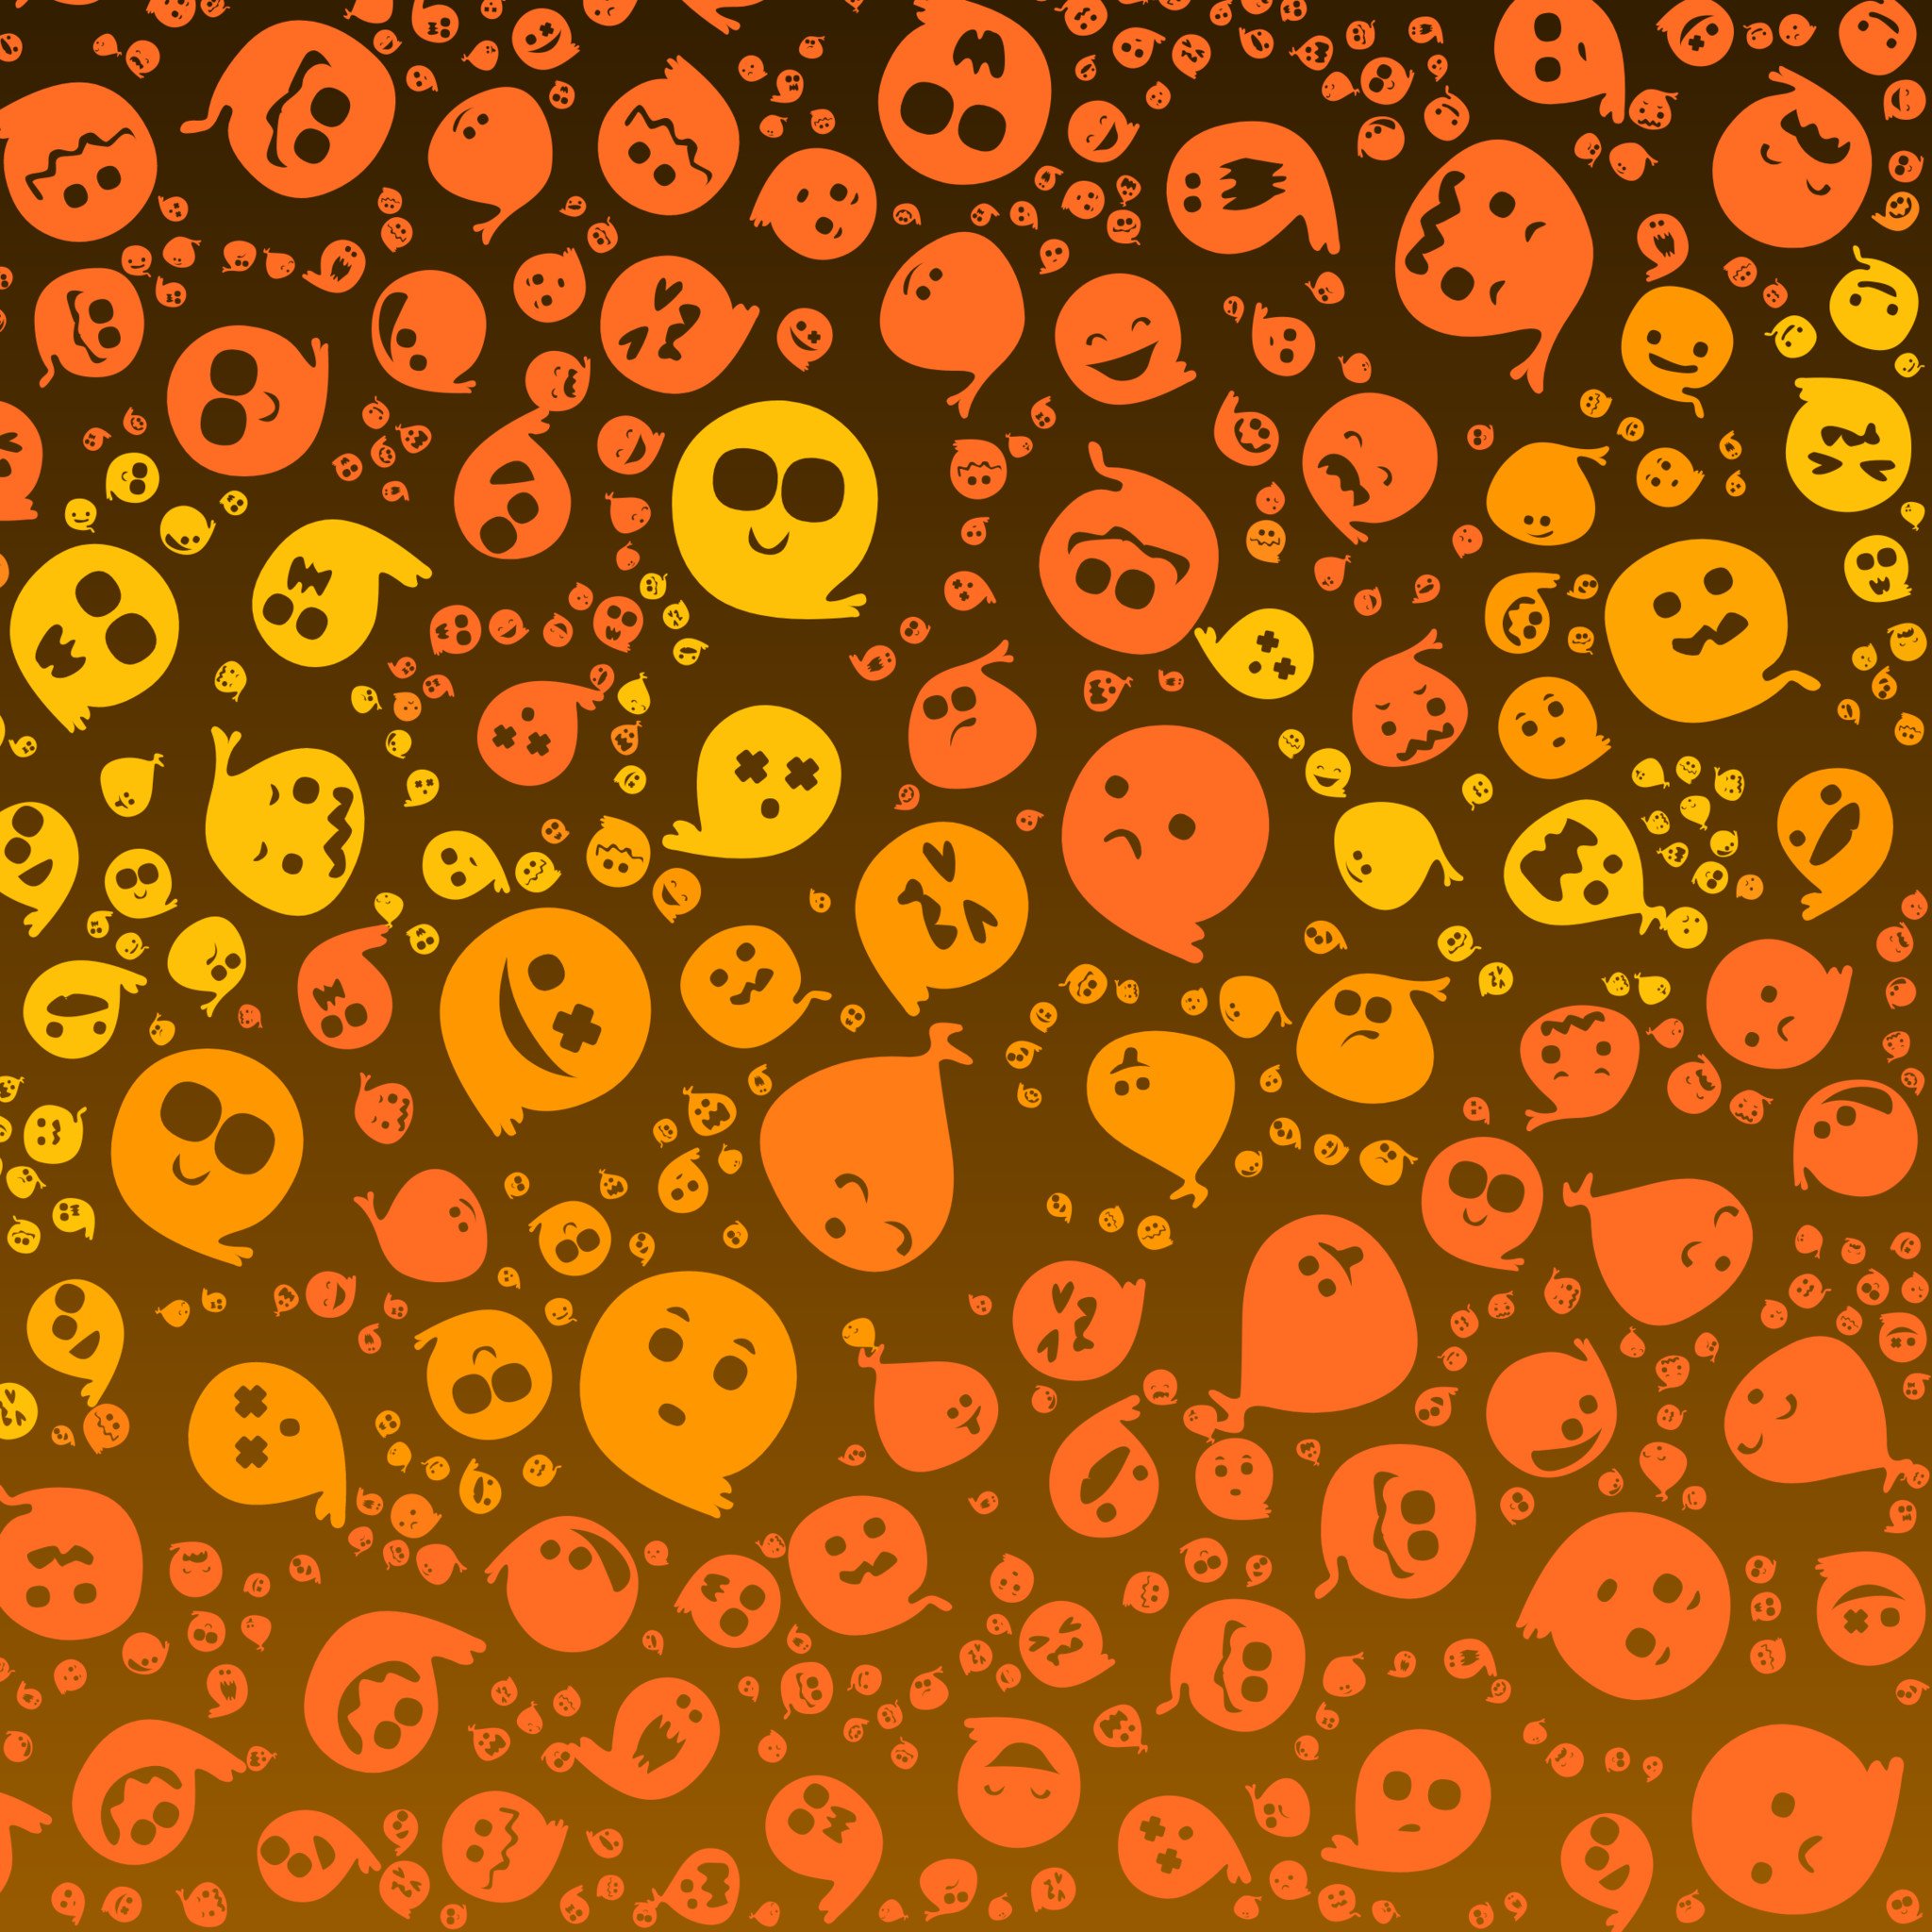 Get Your Pumpkin Fix With These Halloween Worthy Wallpaper